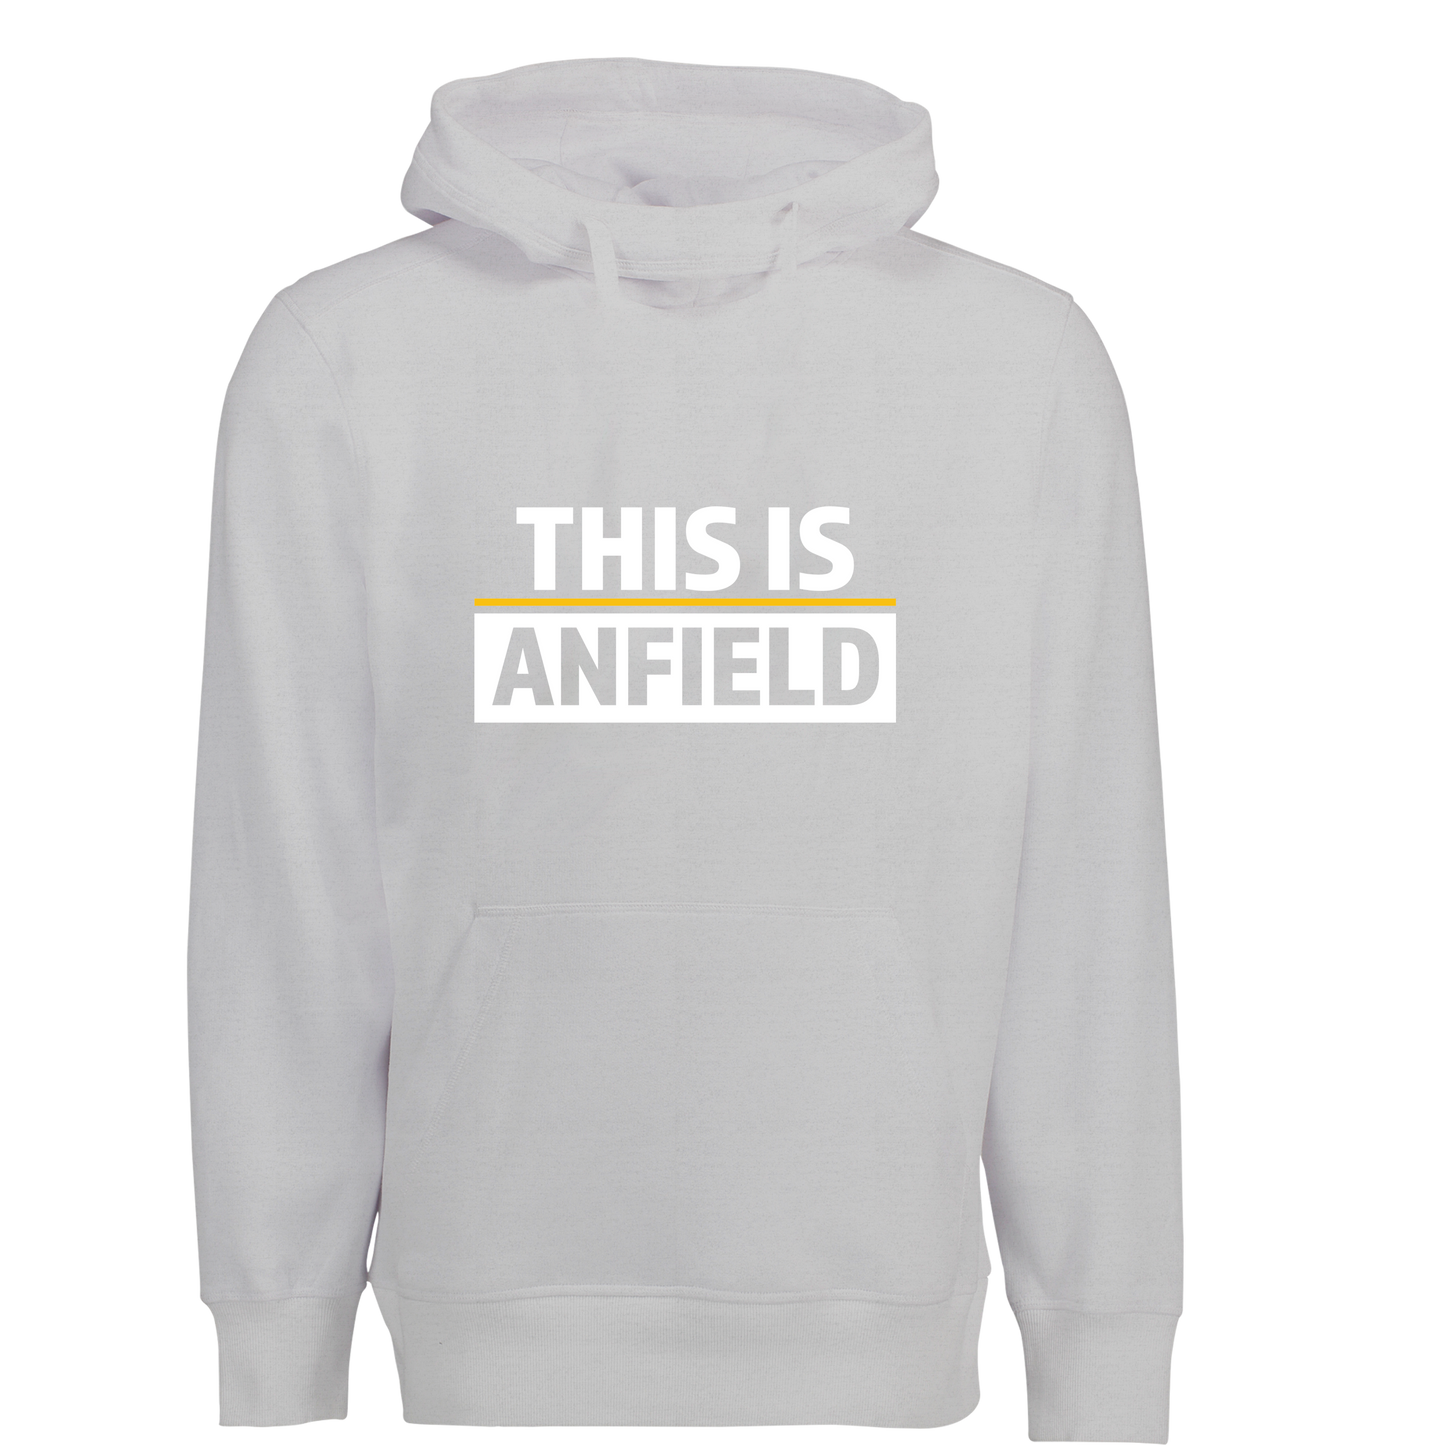 This is anfield - hoodie